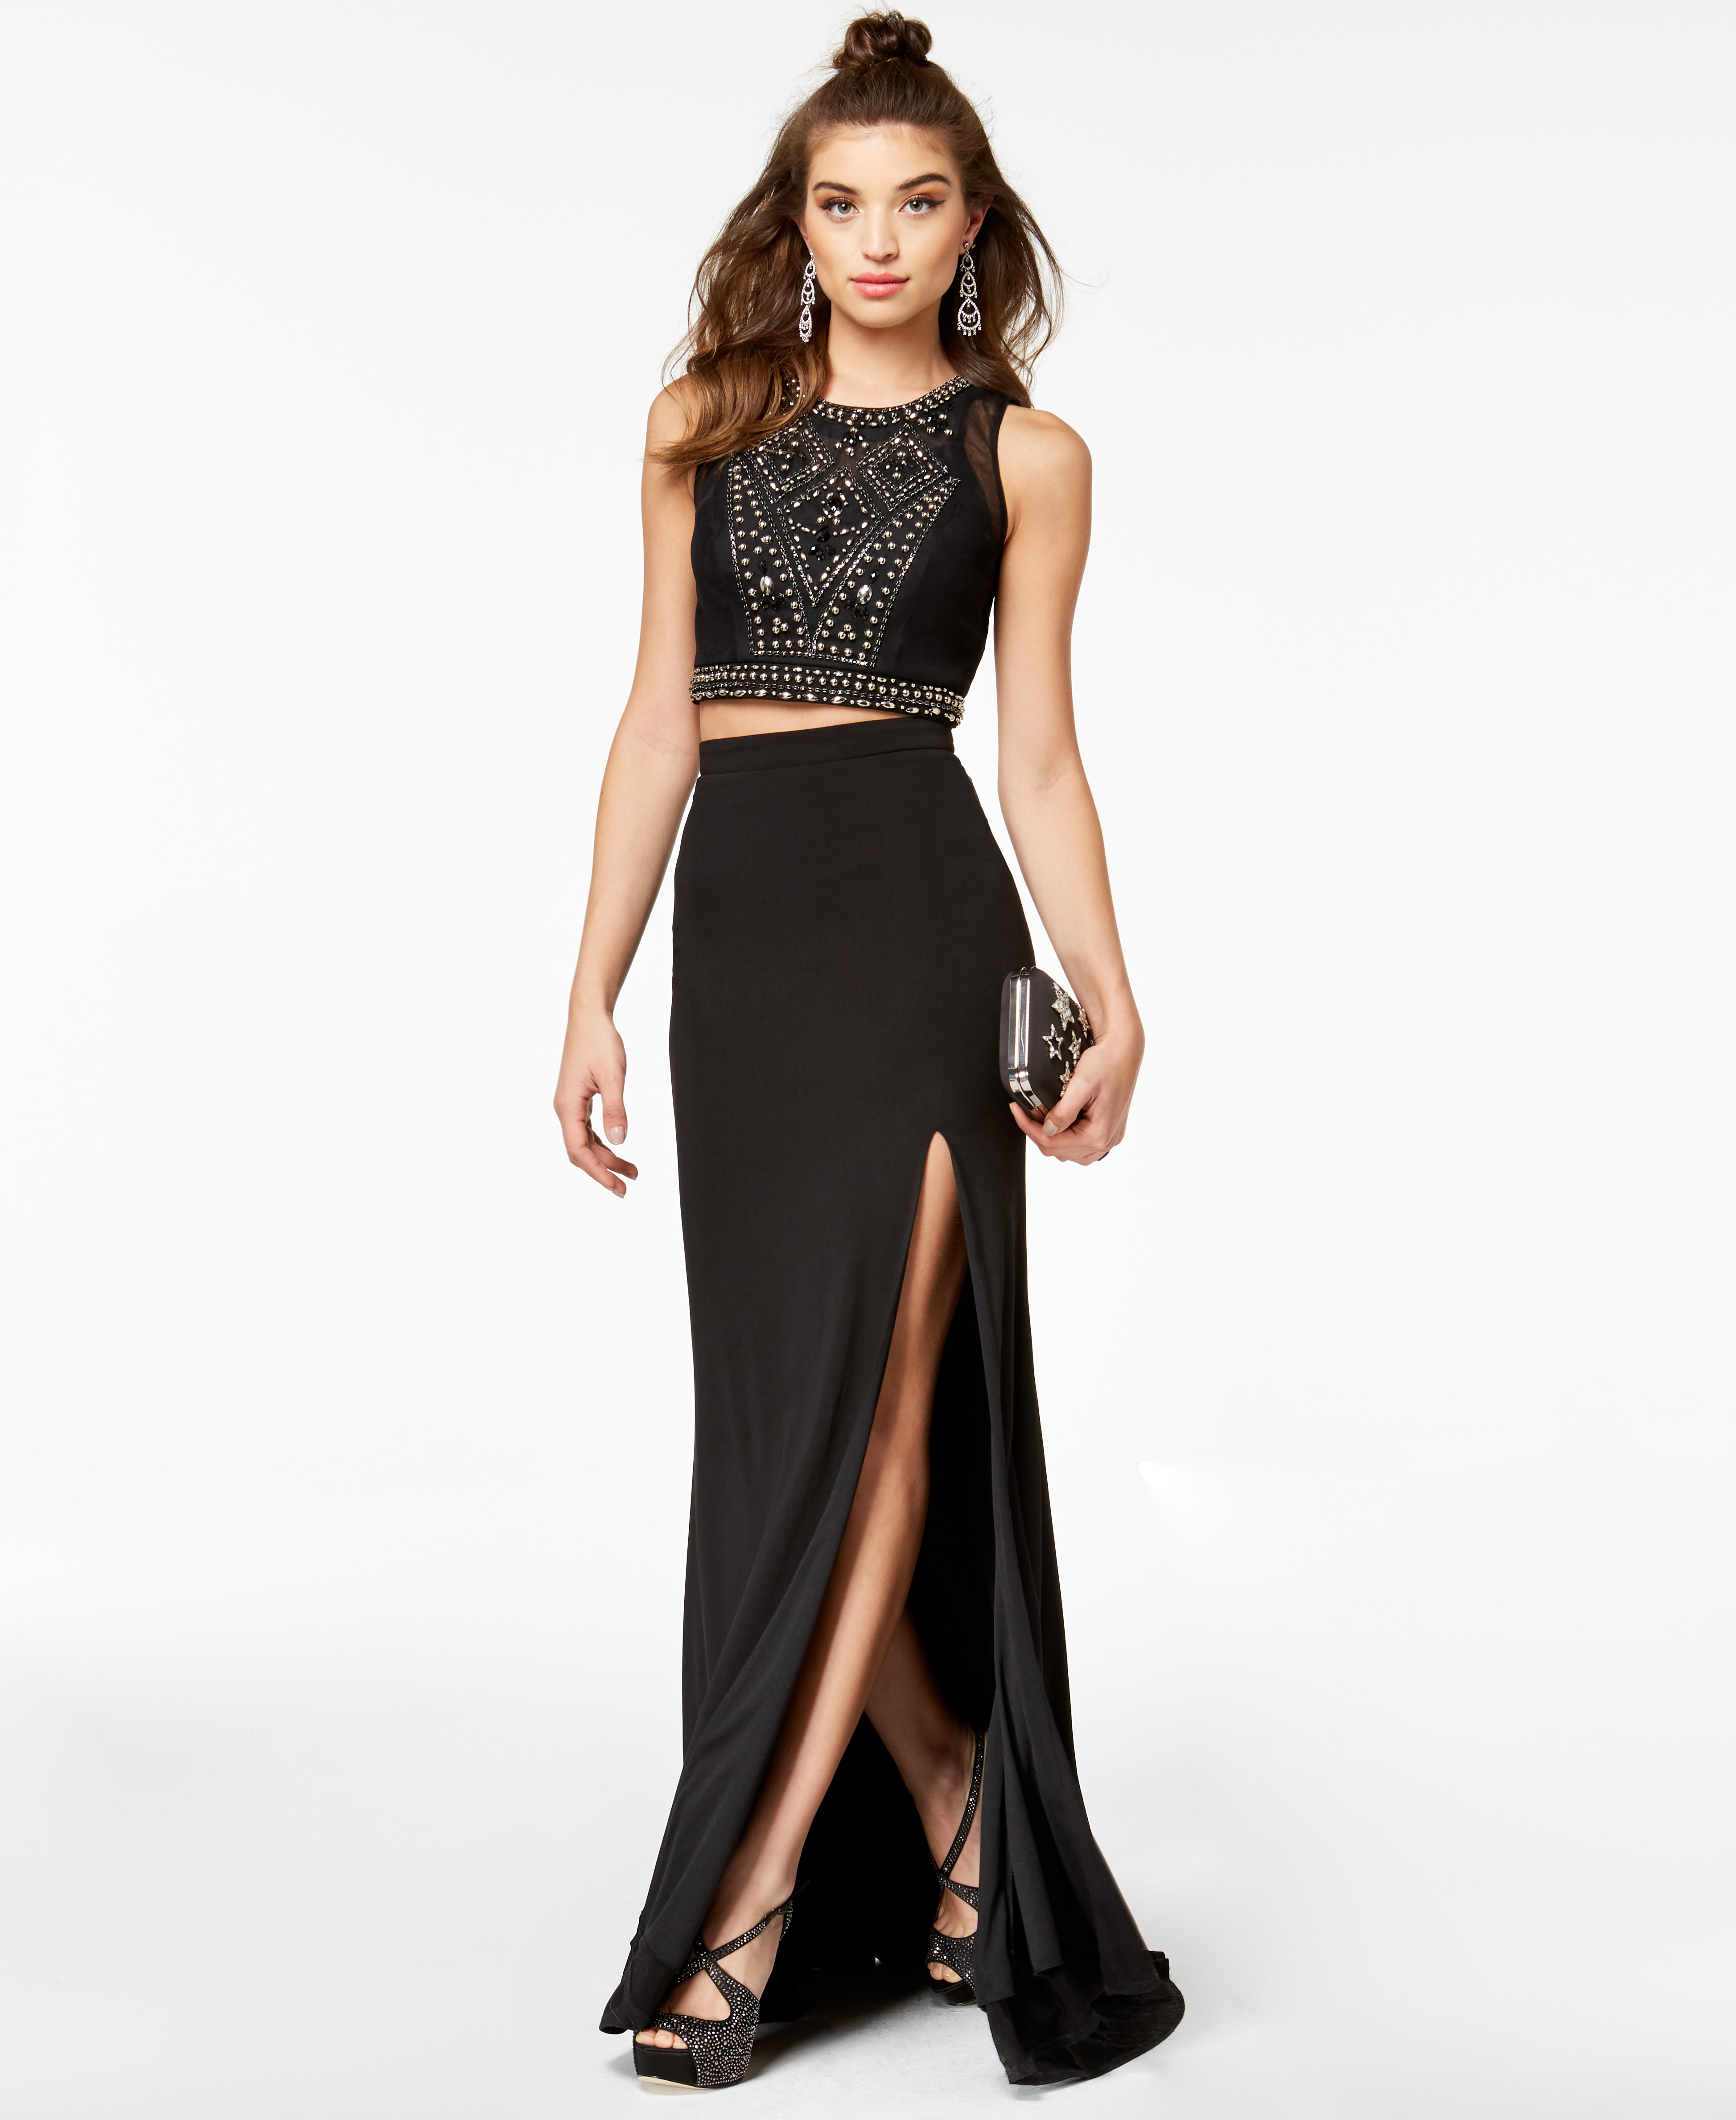 Shine Bright At Prom With Fashion From Macy’s Business Wire